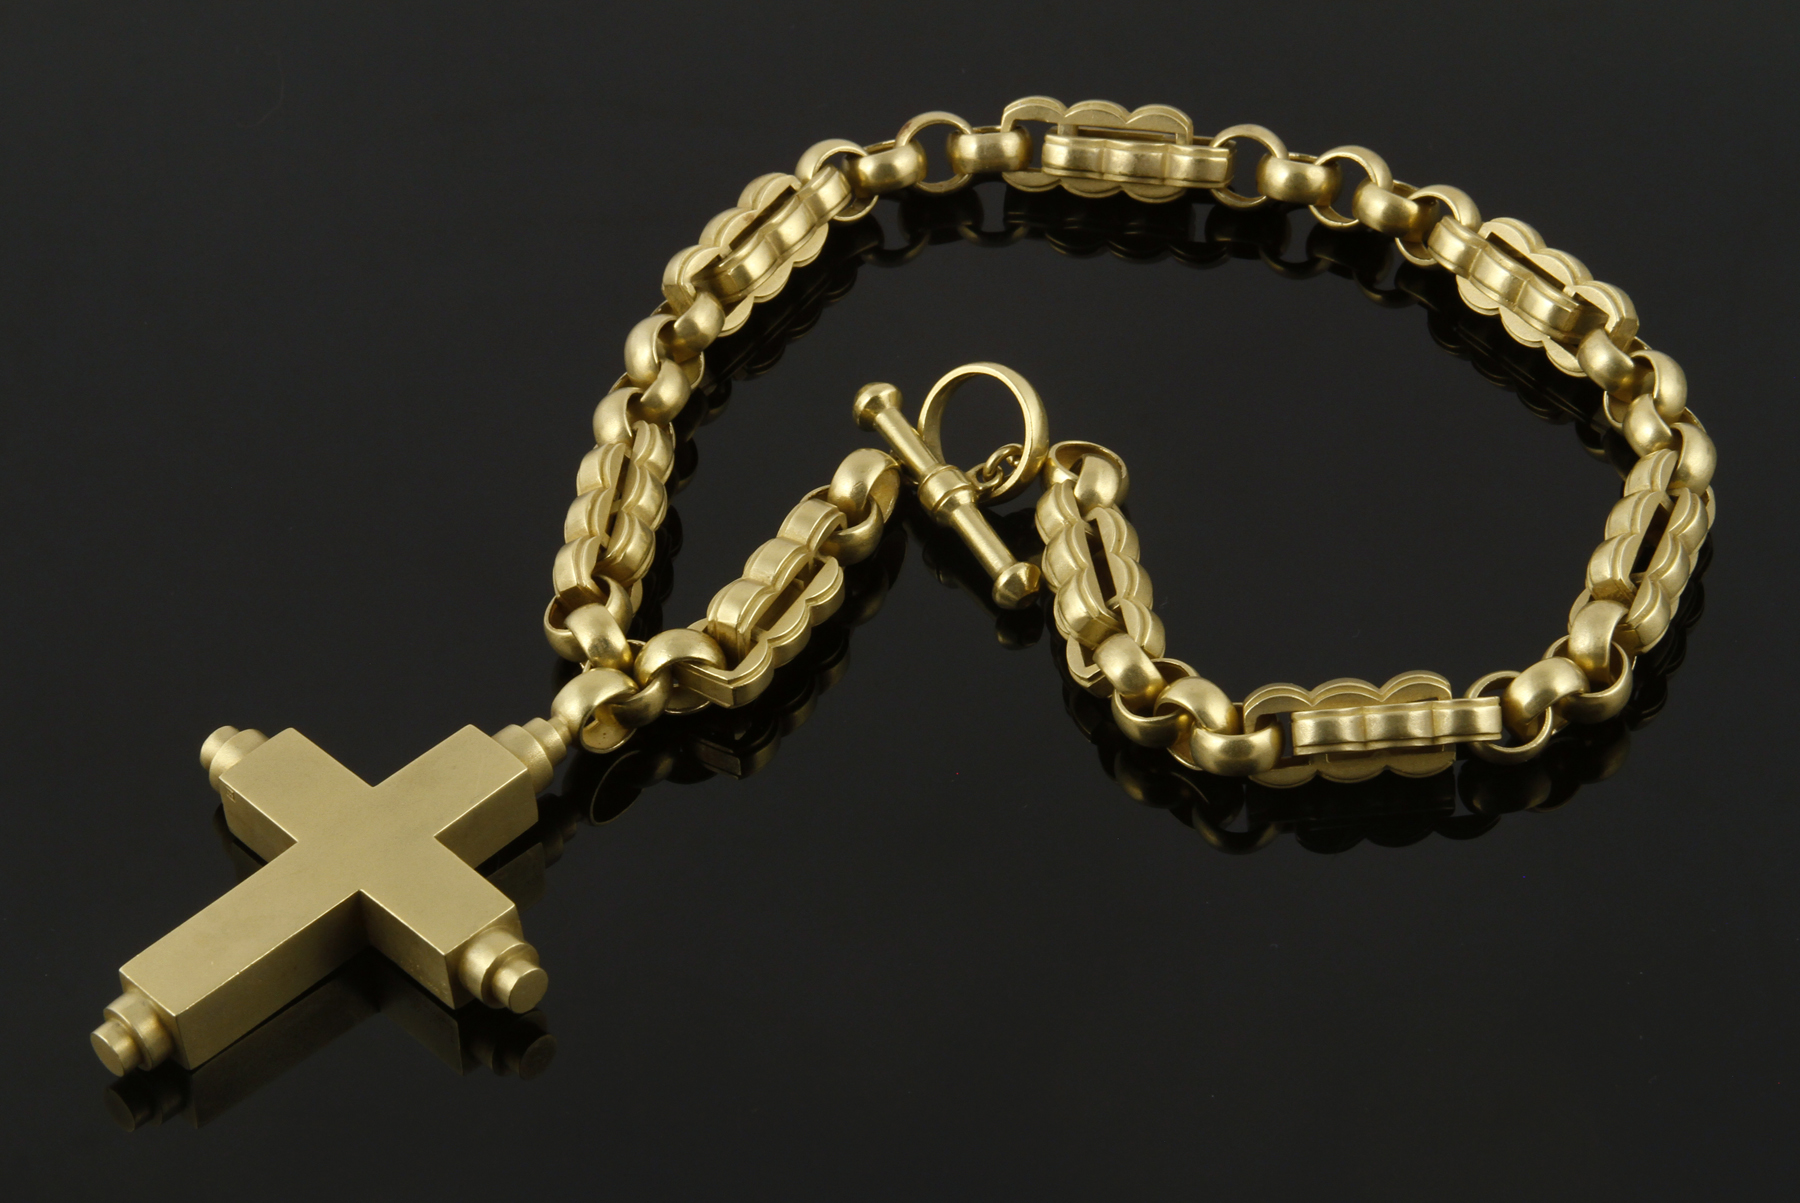 Barry Kieselstein-Cord 18K gold necklace with cross pendant, matte finish, dated 1988, approx. 248 grams TW